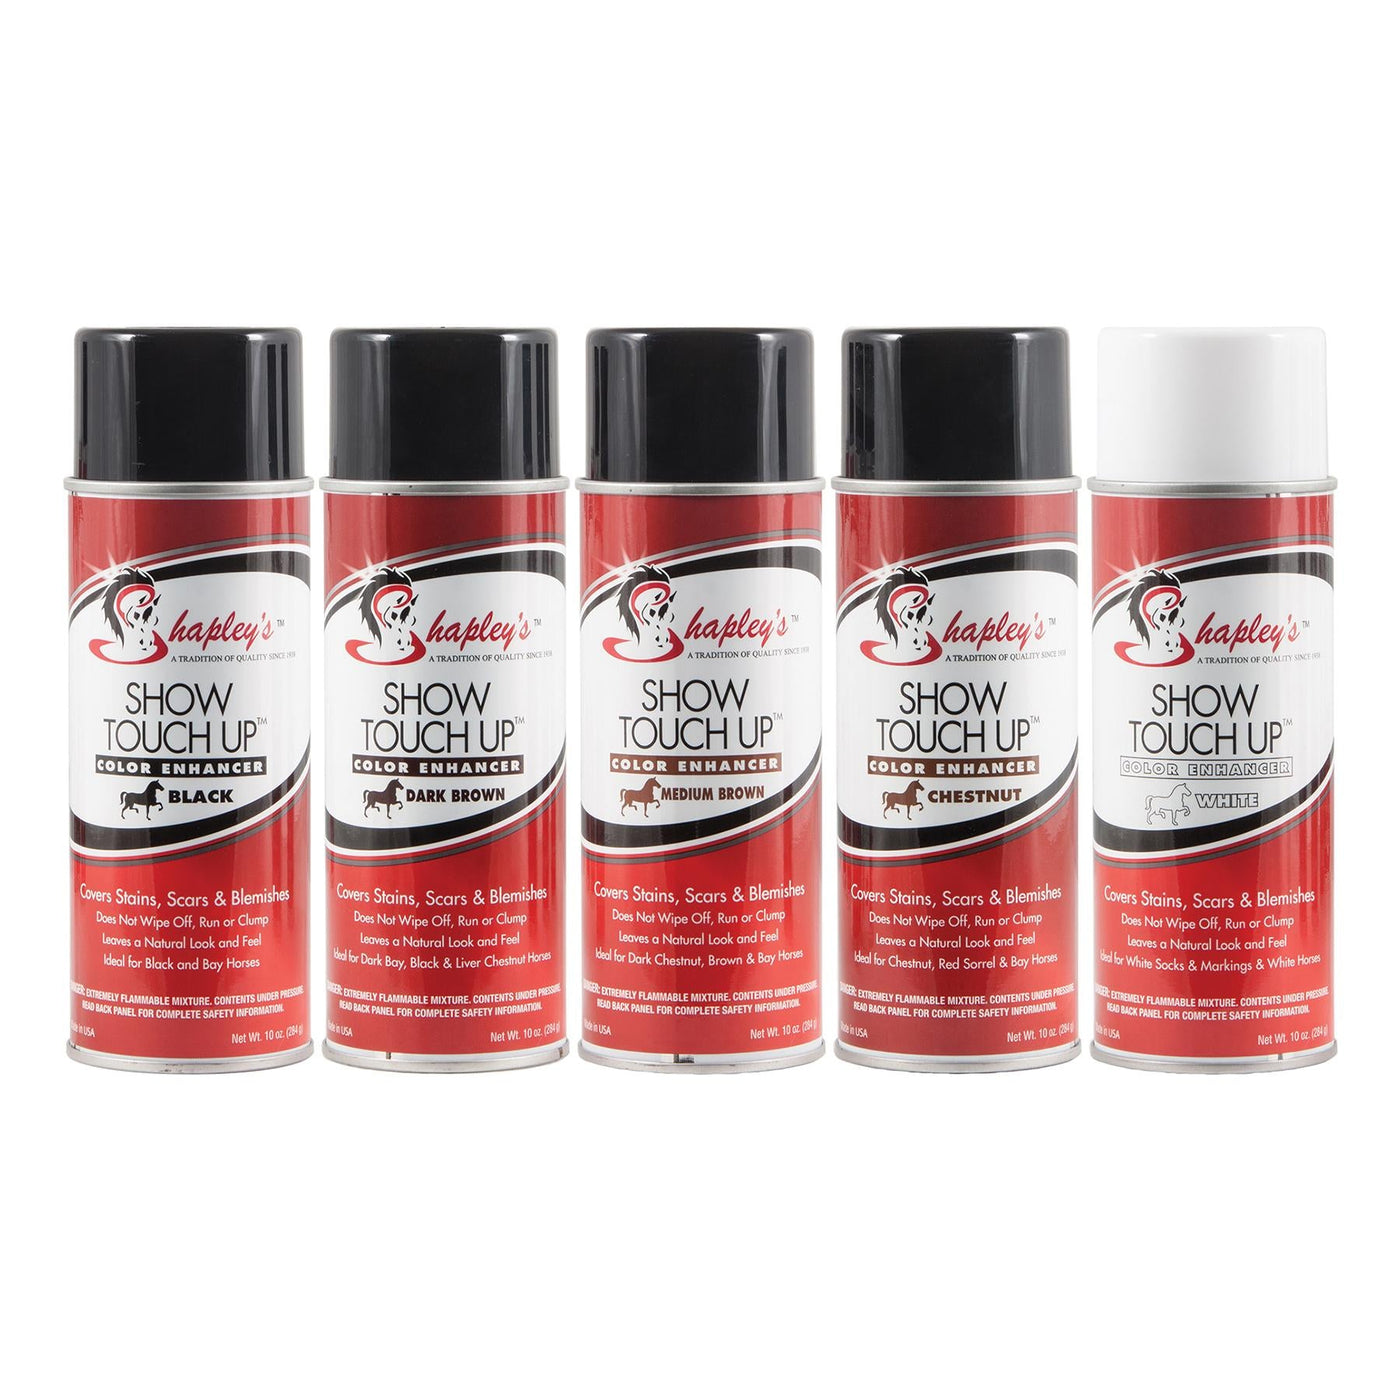 SHAPLEY'S Show Touch Up Spray